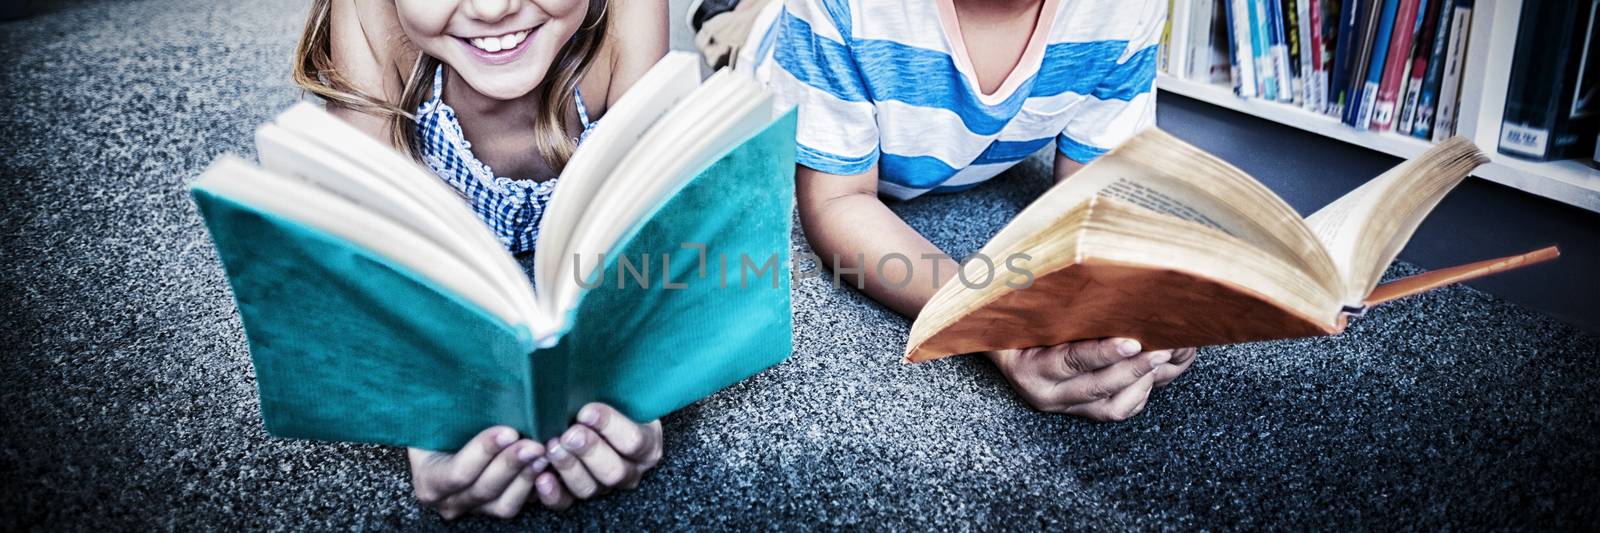 Portrait of happy school kids lying on floor and reading a book in library at school